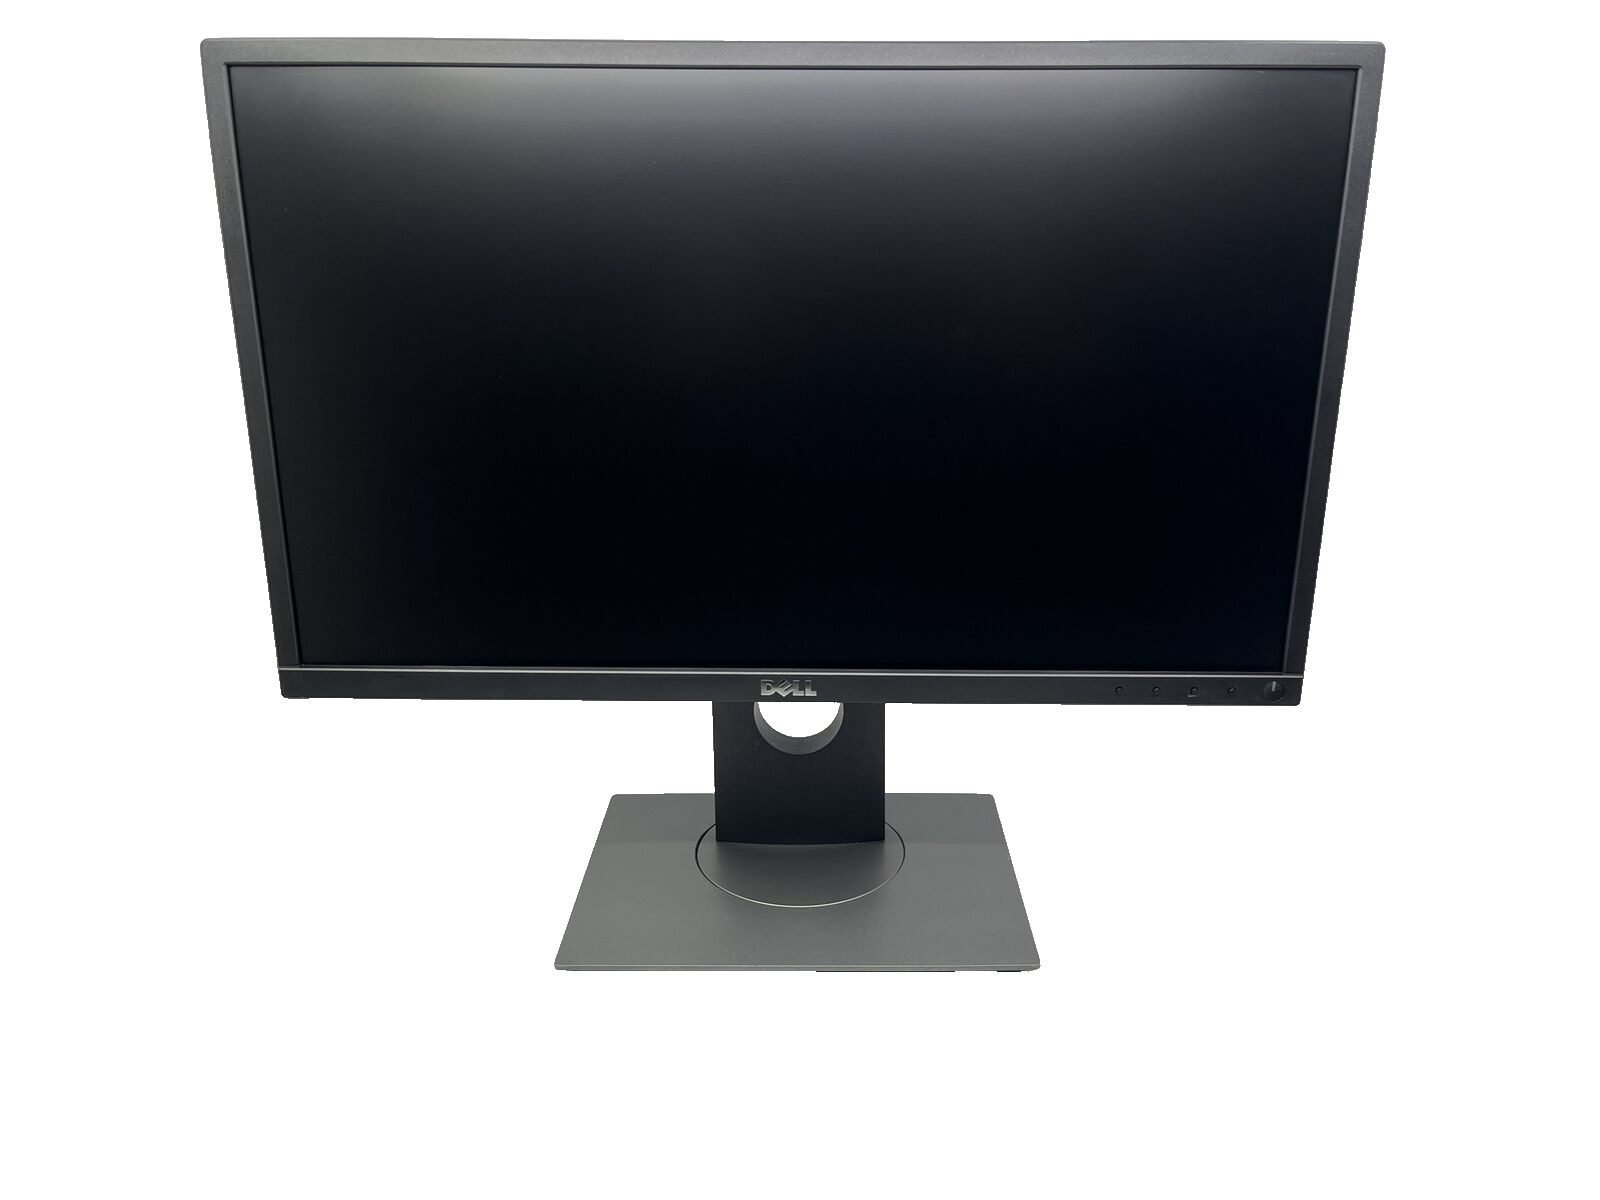 Dell P2217H 21.5” Monitor, 1920 x 1080 @ 60Hz, HDMI/VGA/DP with Stand